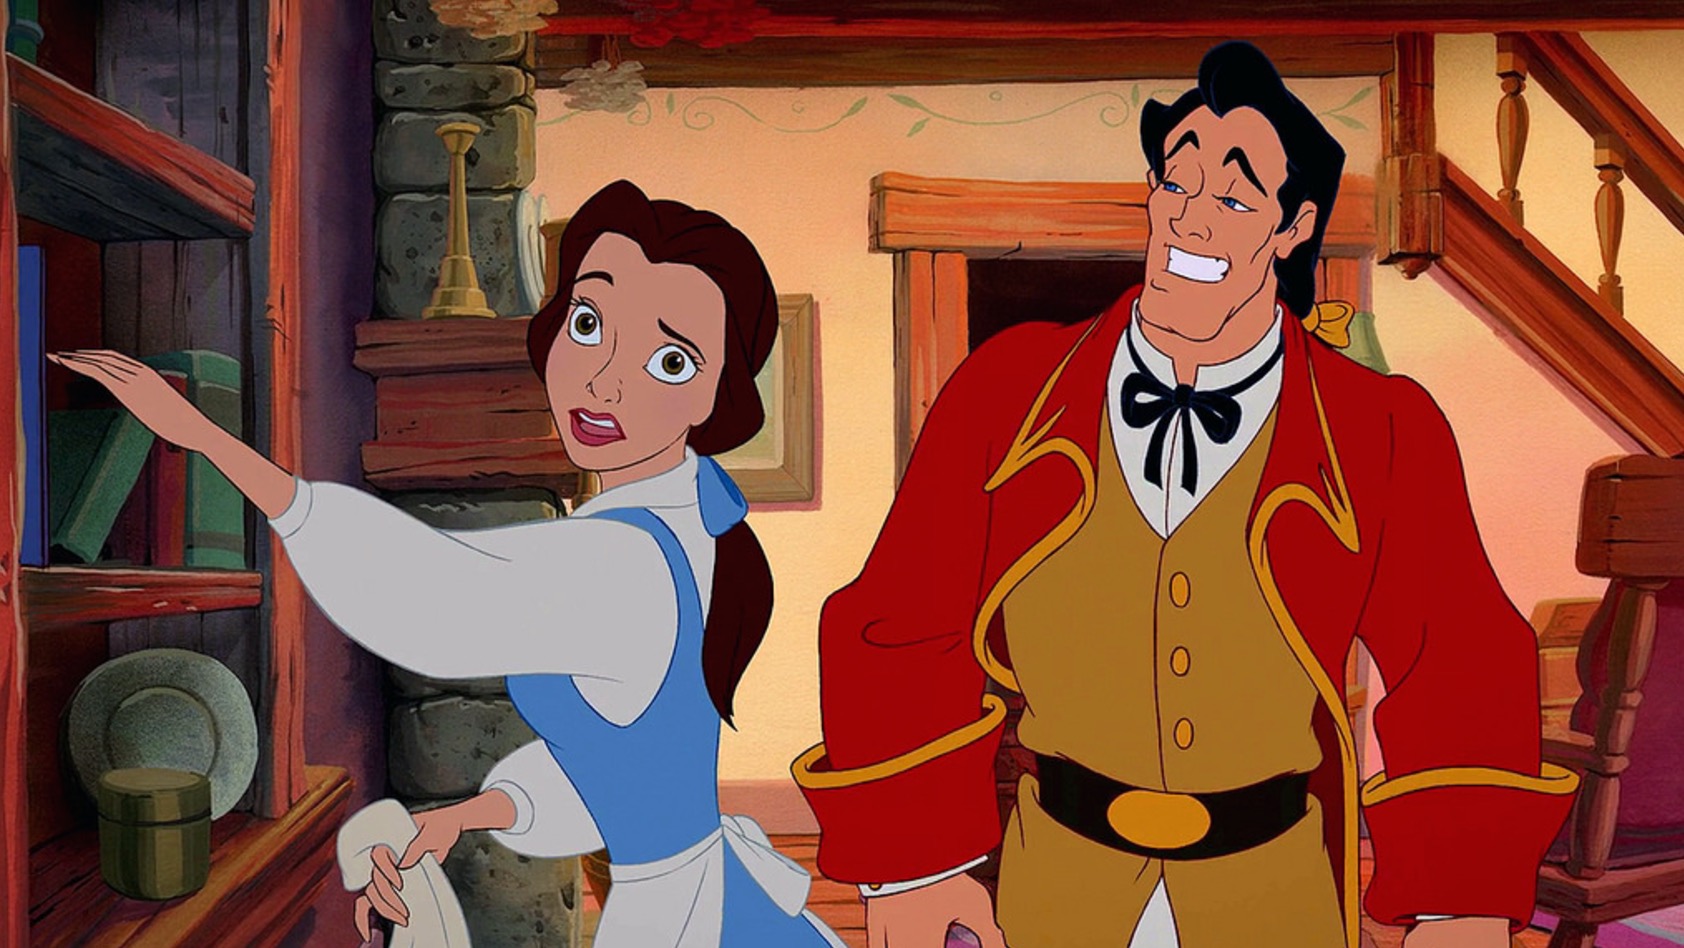 The Animated Beauty And The Beast Remains A Near-Perfect Masterpiece